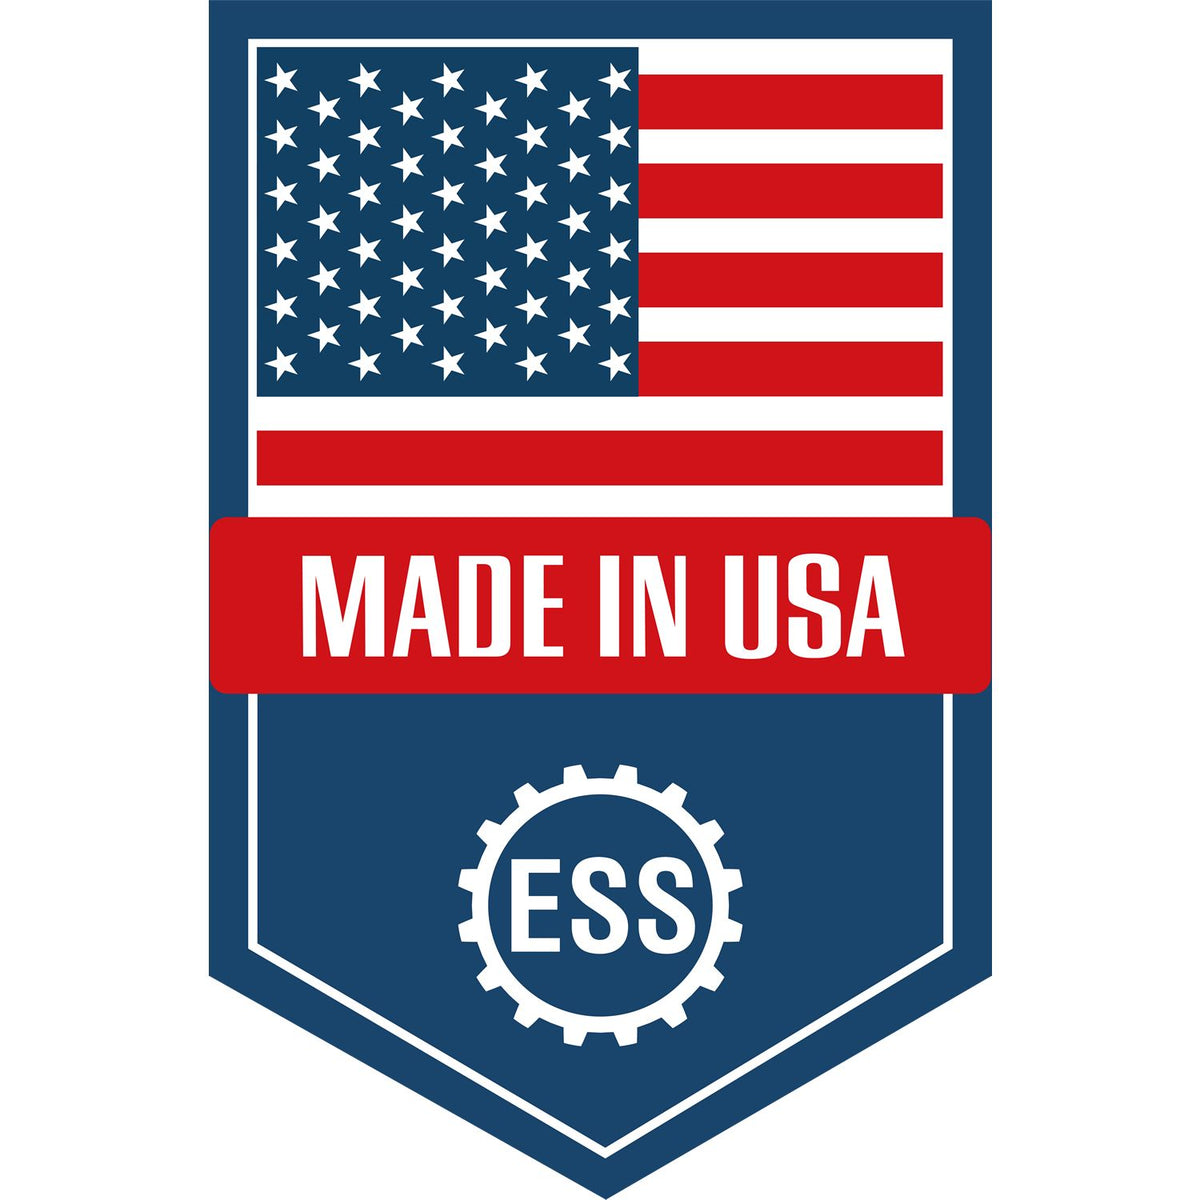 An icon or graphic with an American flag and text reading Made in USA for the Gift Louisiana Landscape Architect Seal